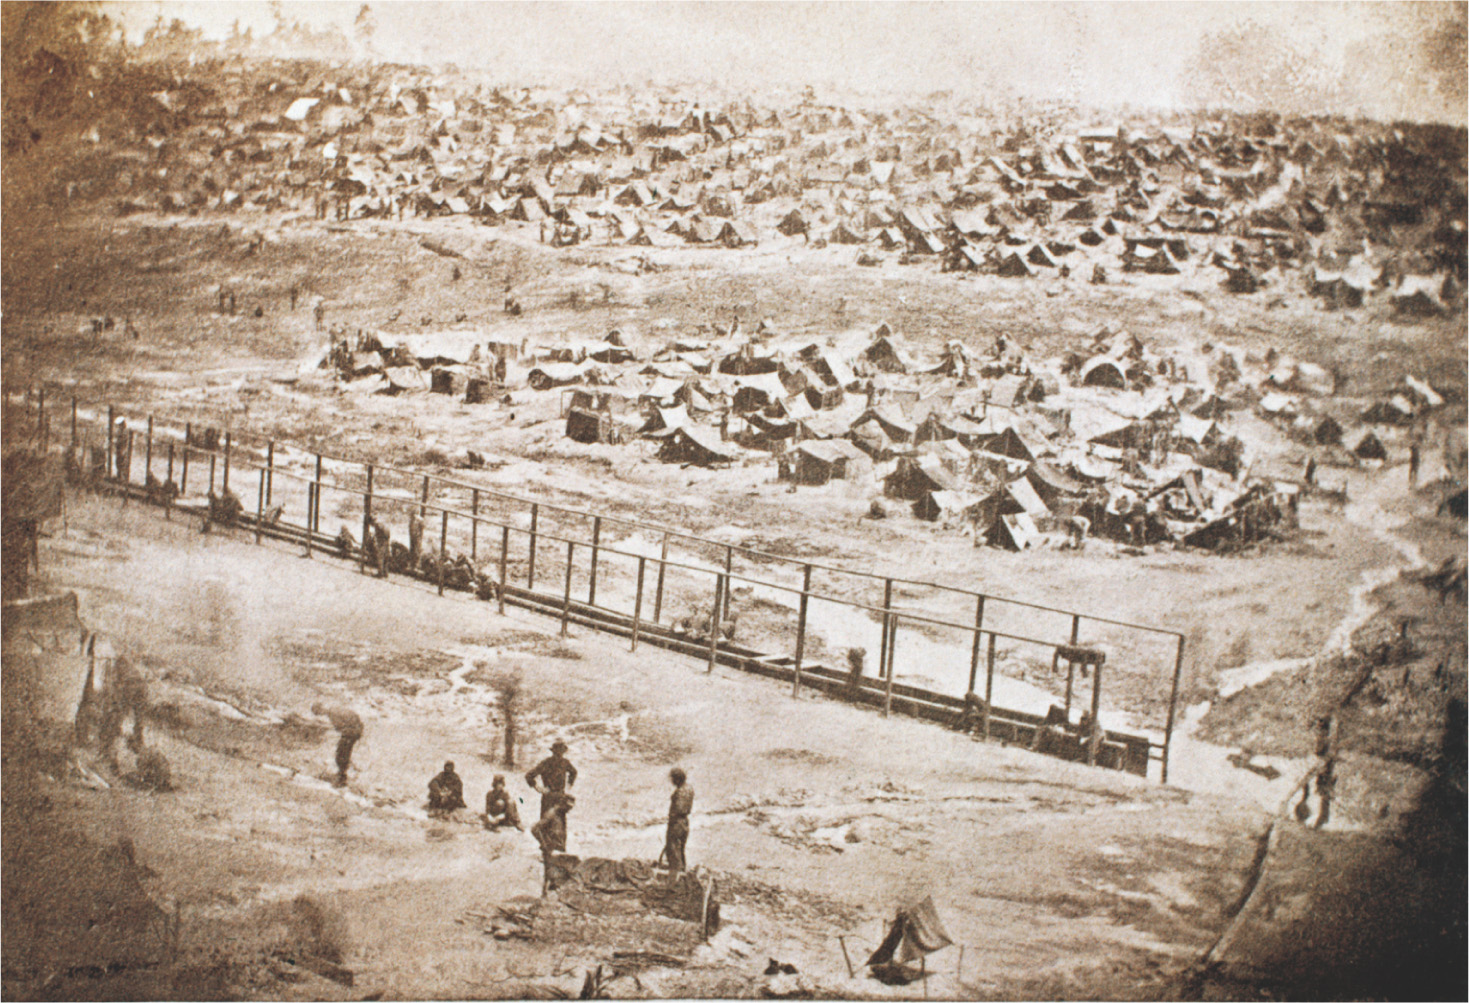 An aerial photo shows rows of tents in a field behind a fence.